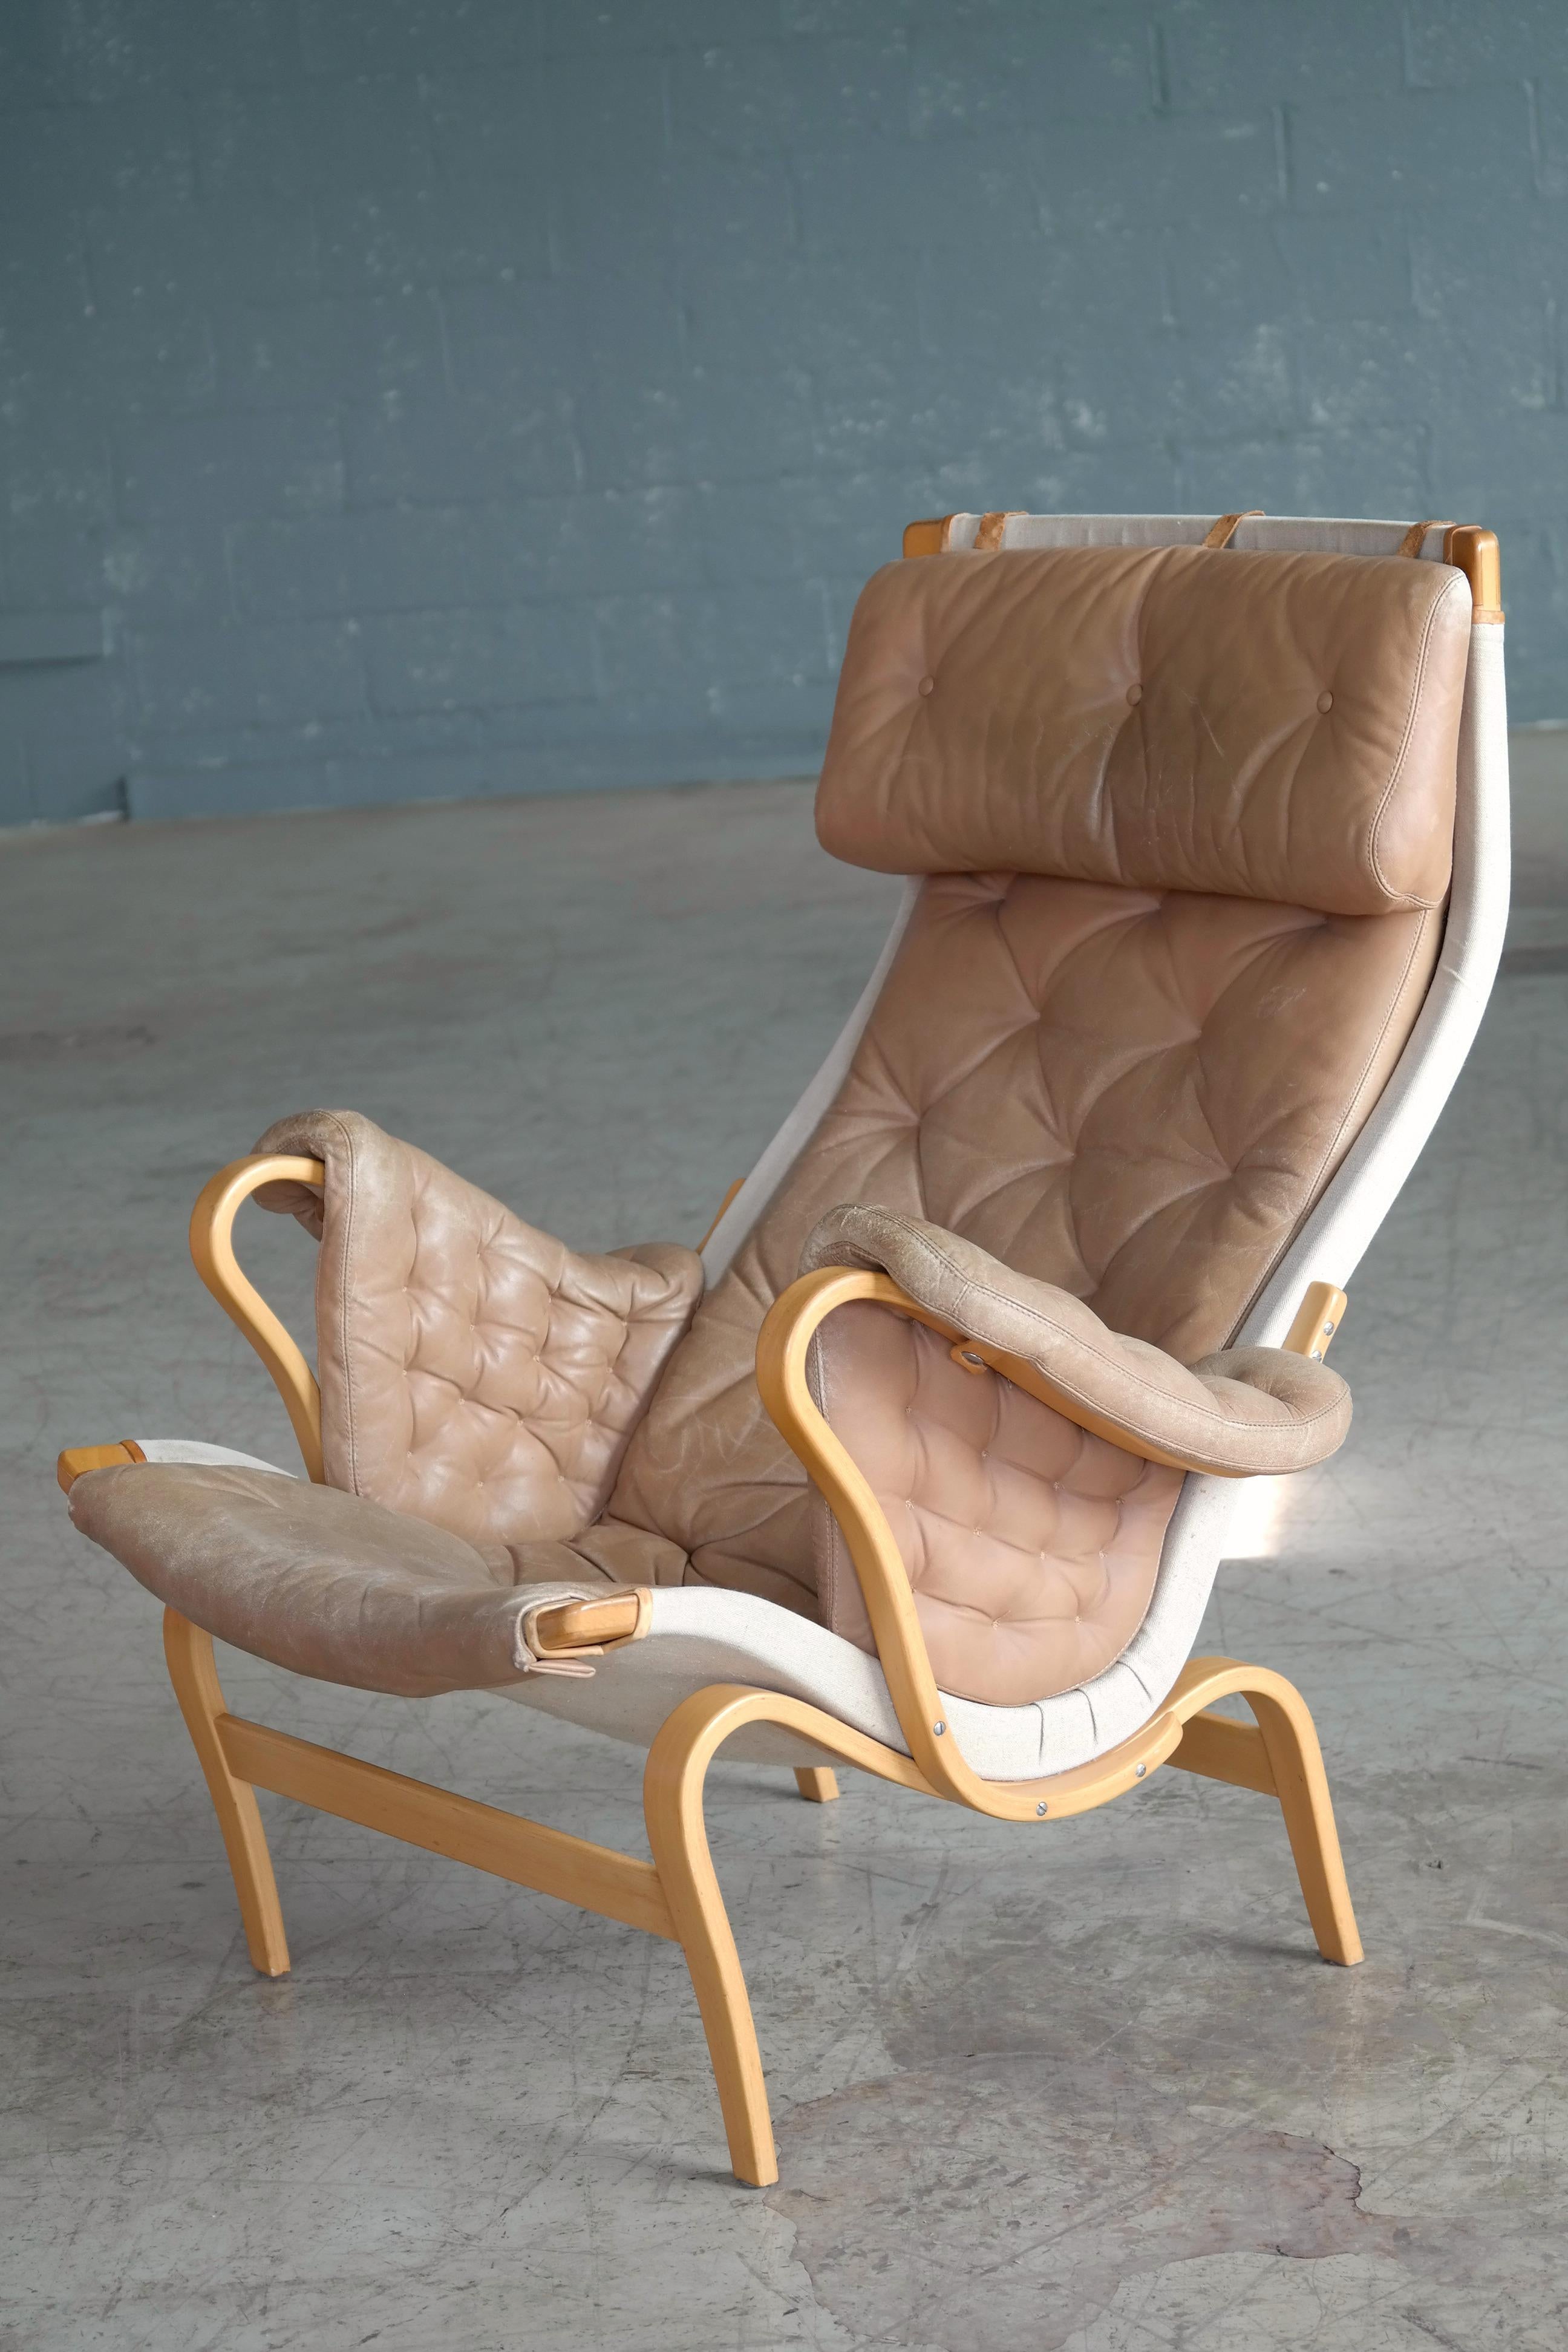 Swedish Pernilla Lounge Chair in Camel Colored Tufted Leather by Bruno Mathsson for DUX